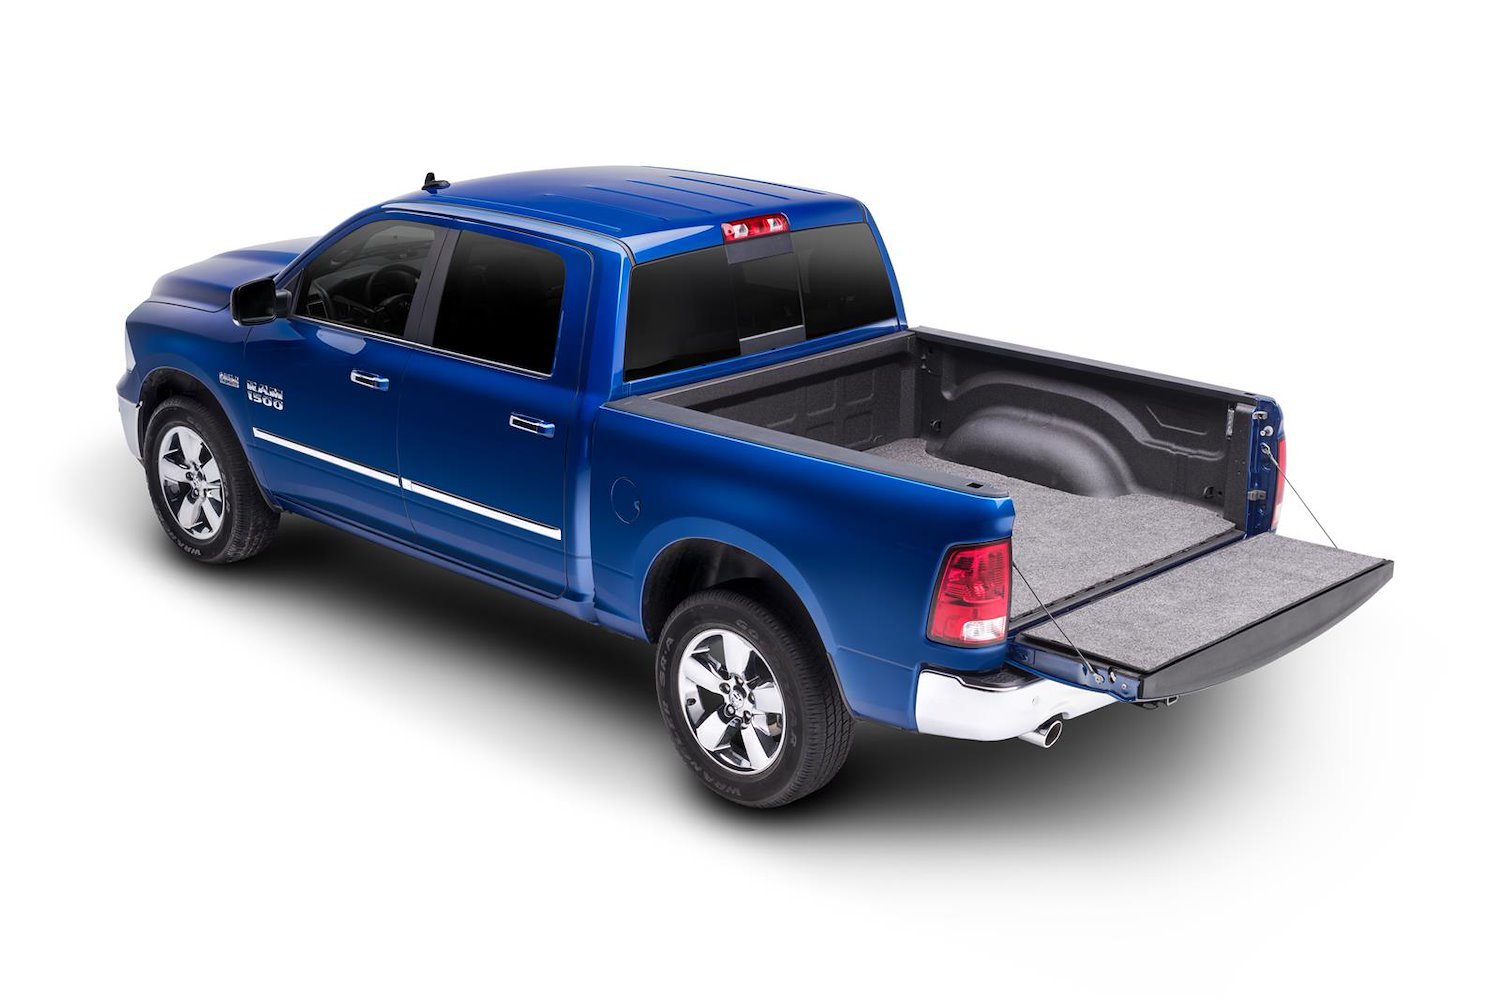 Mat Non-Liner/Spray-In Style 2009-2016 Dodge Ram